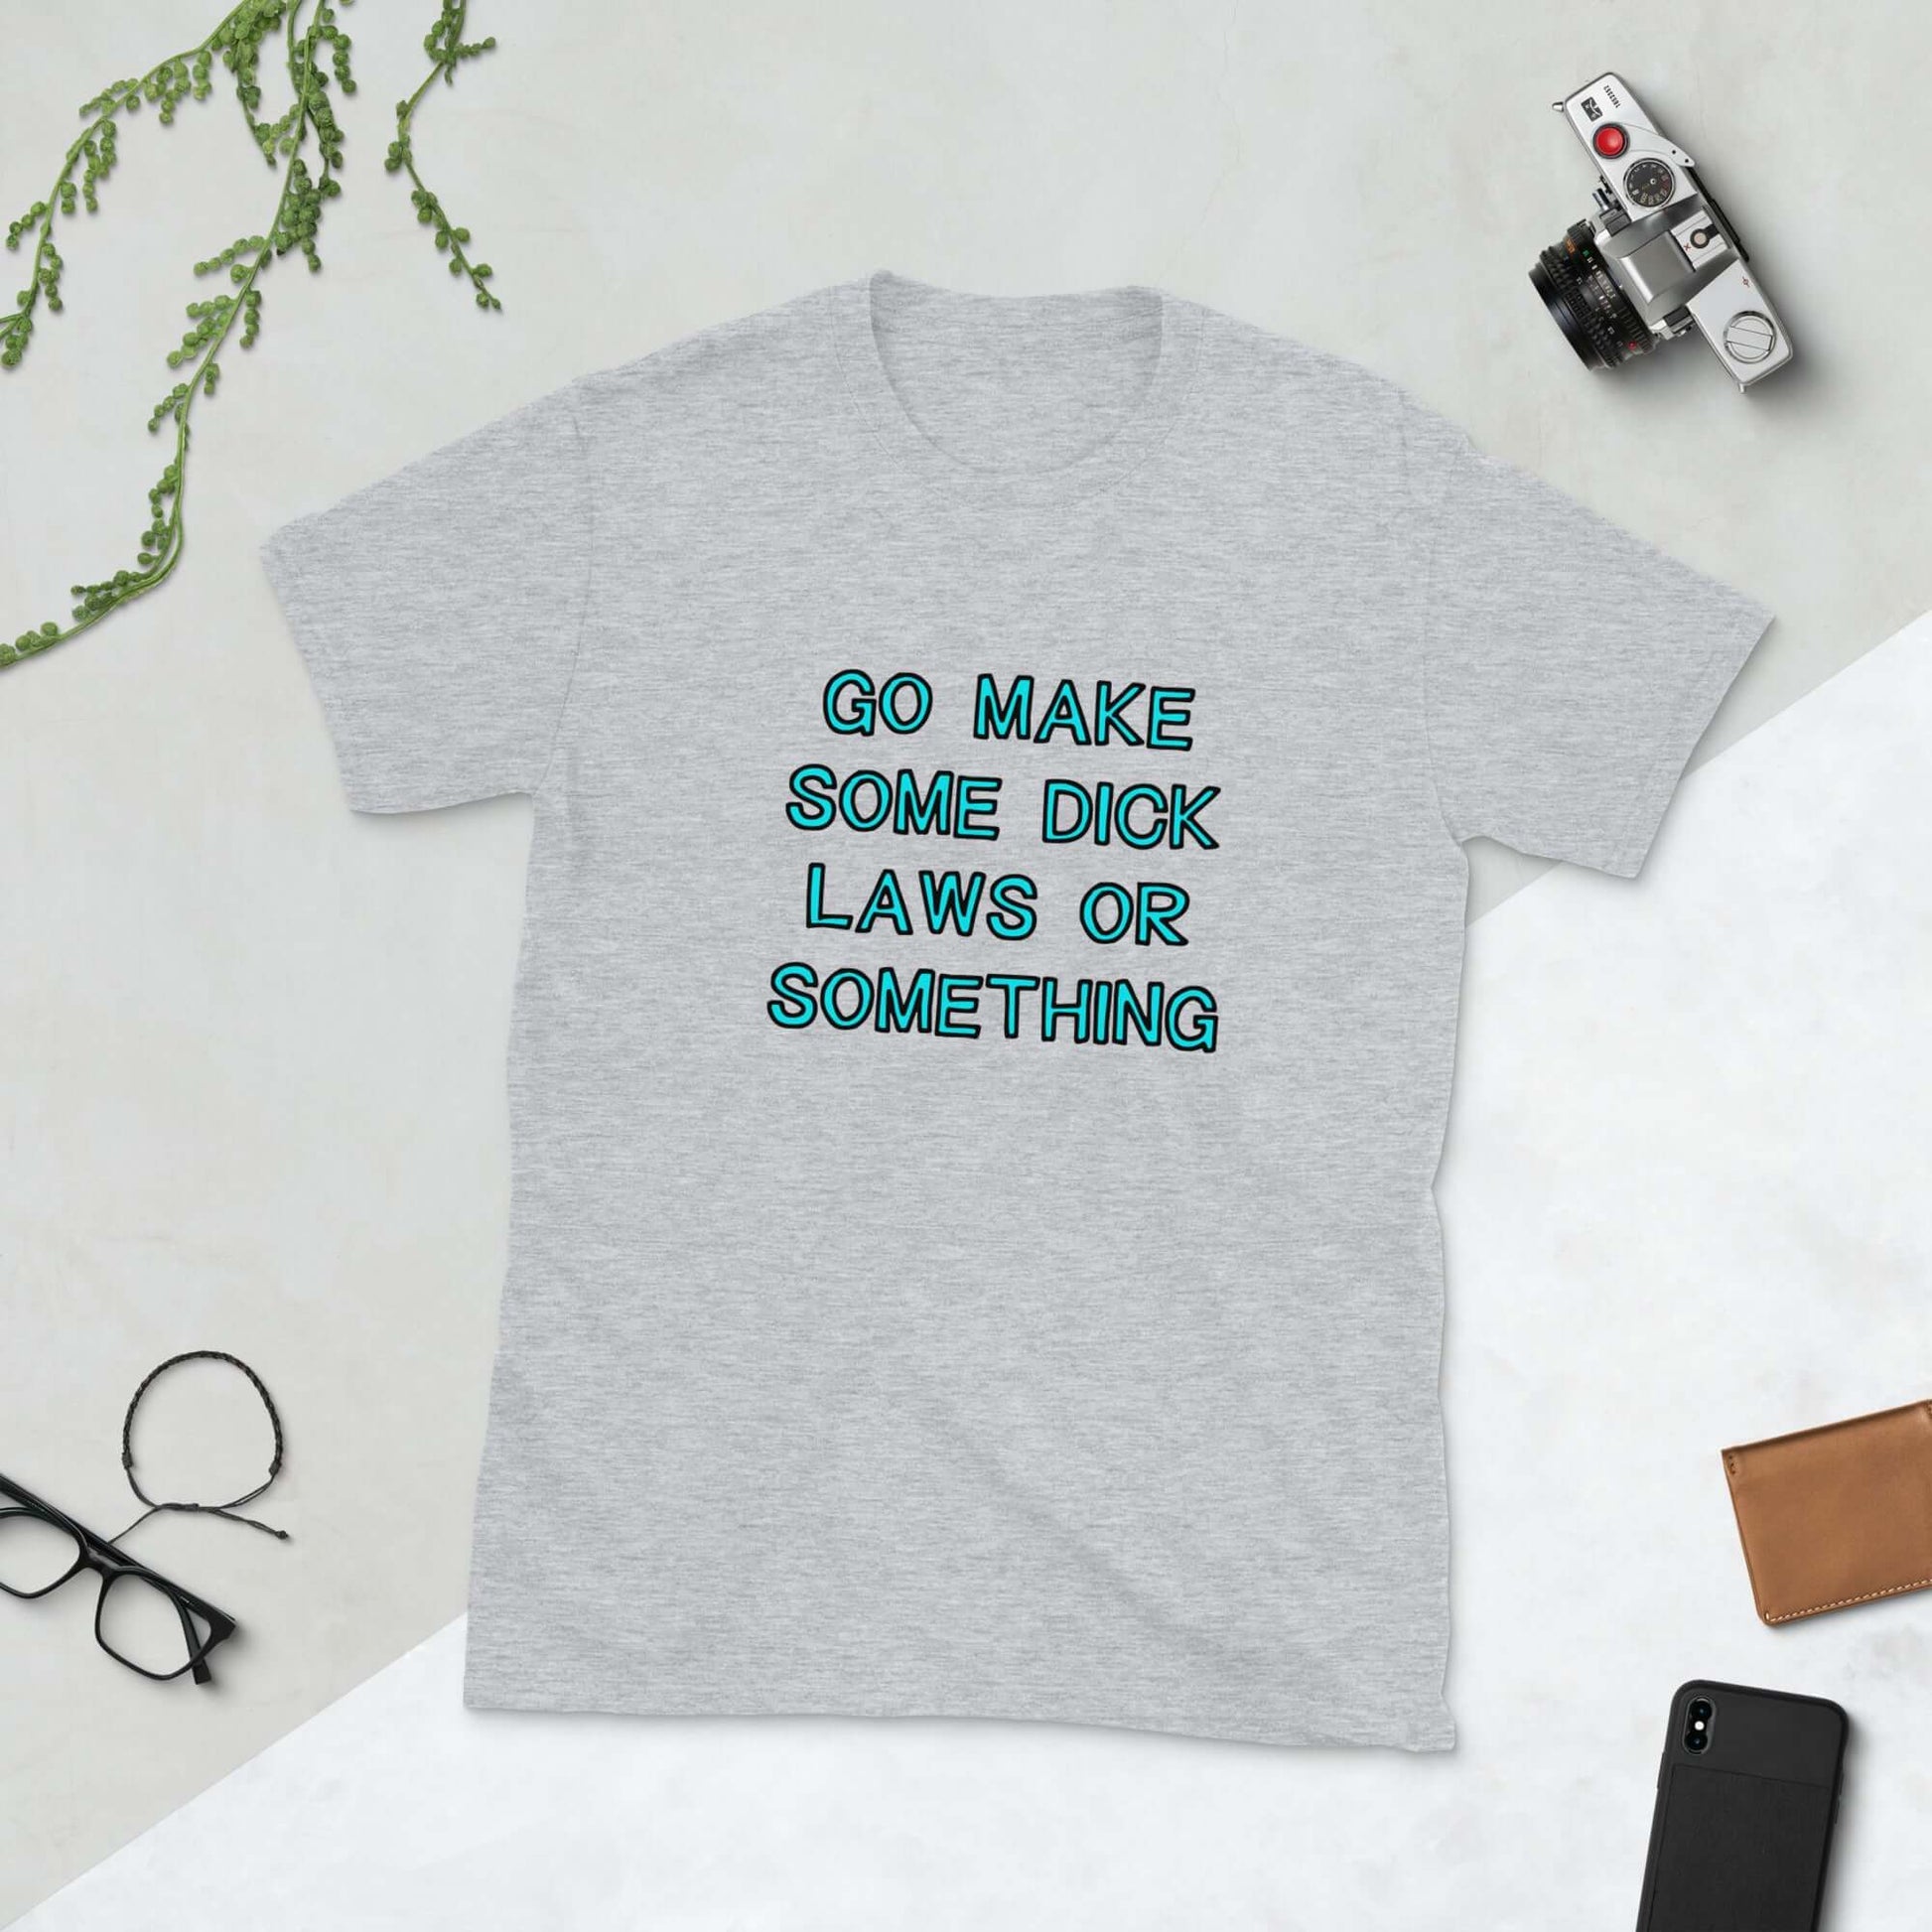 Light grey t-shirt with the words Go make some dick laws or something printed on the front. The text is turquoise with black outline.